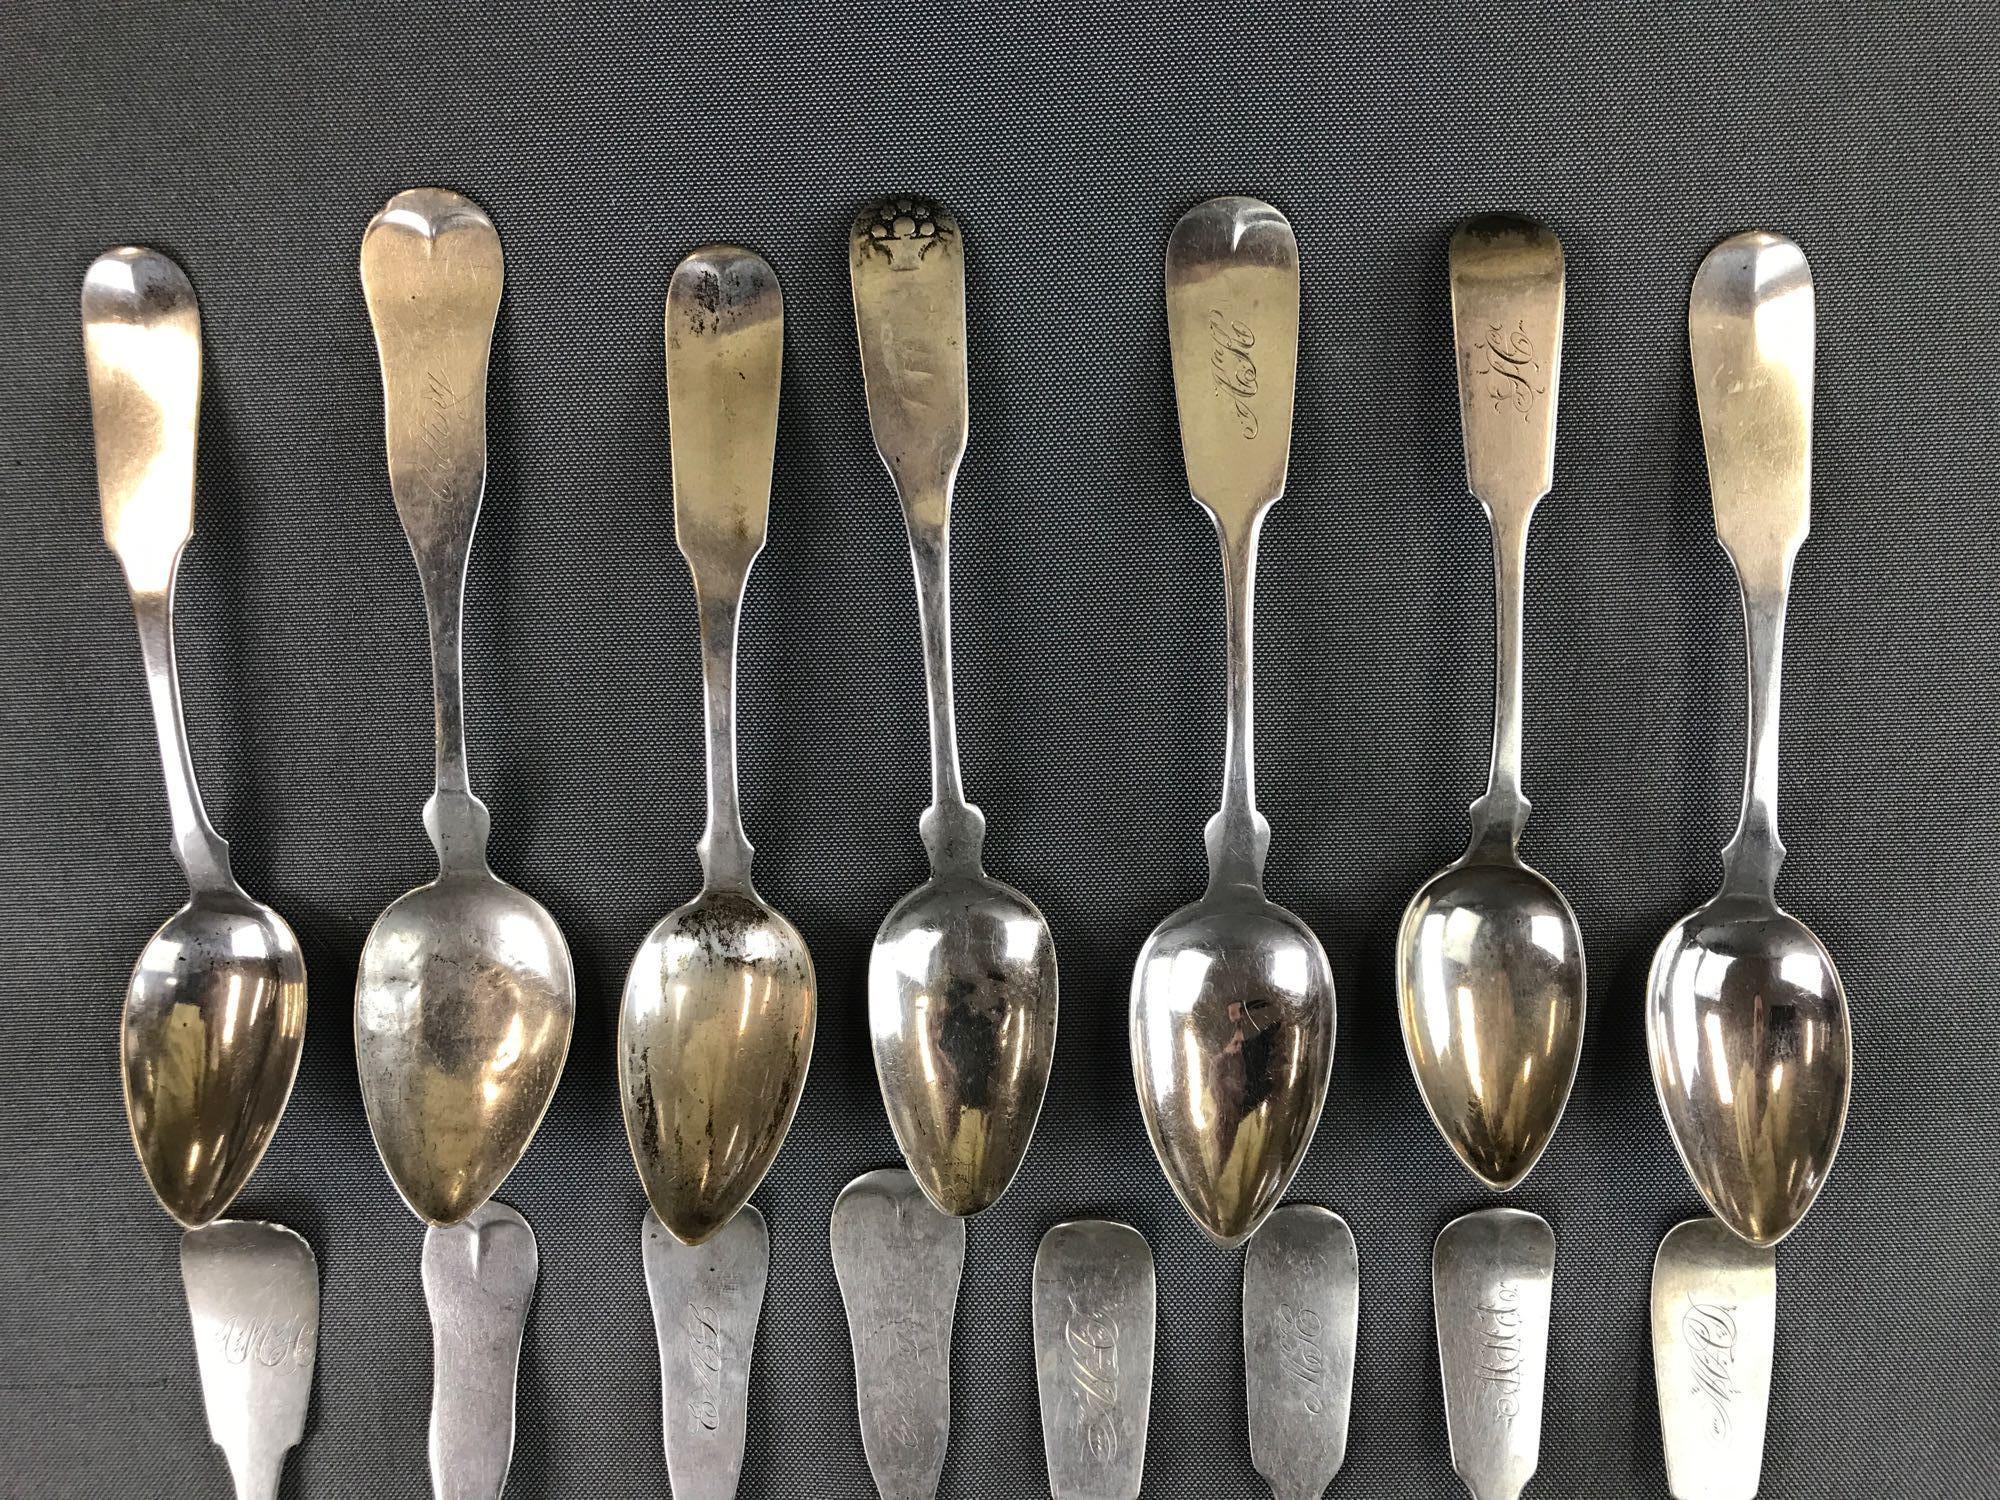 Group of 15 antique sterling or coin silver fiddleback spoons